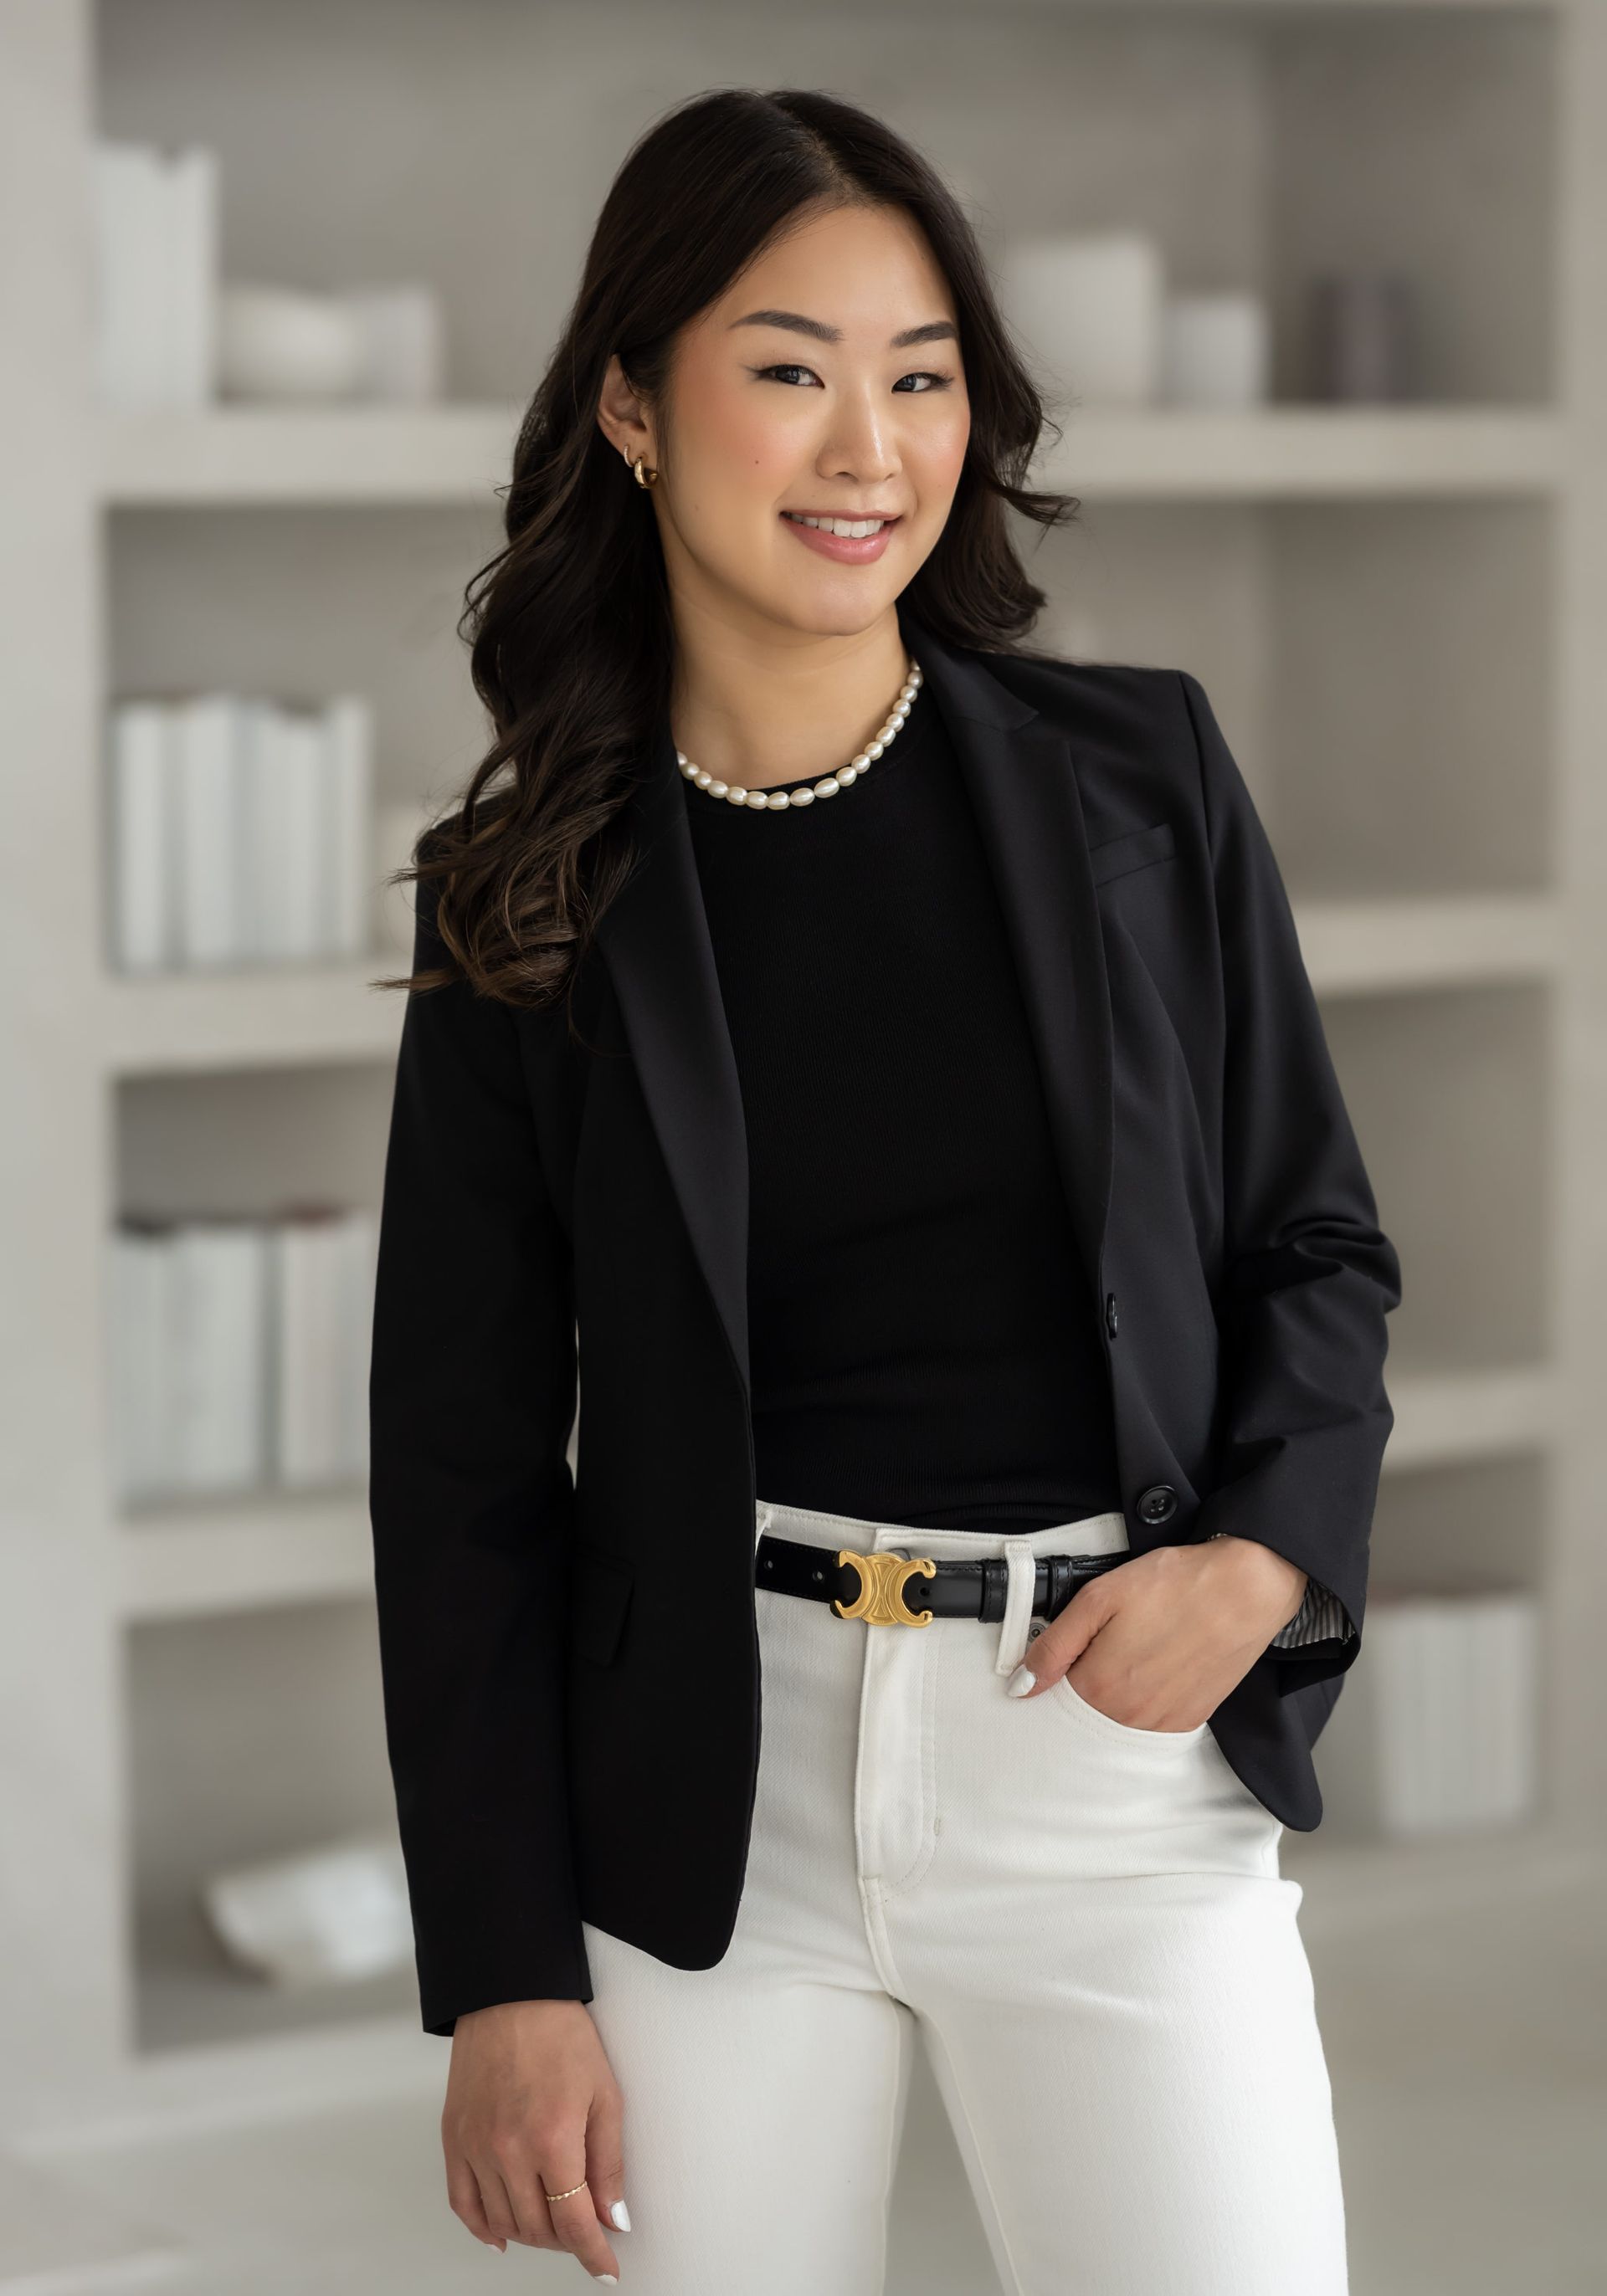 A woman wearing a black blazer and white pants poses for professional headshots.